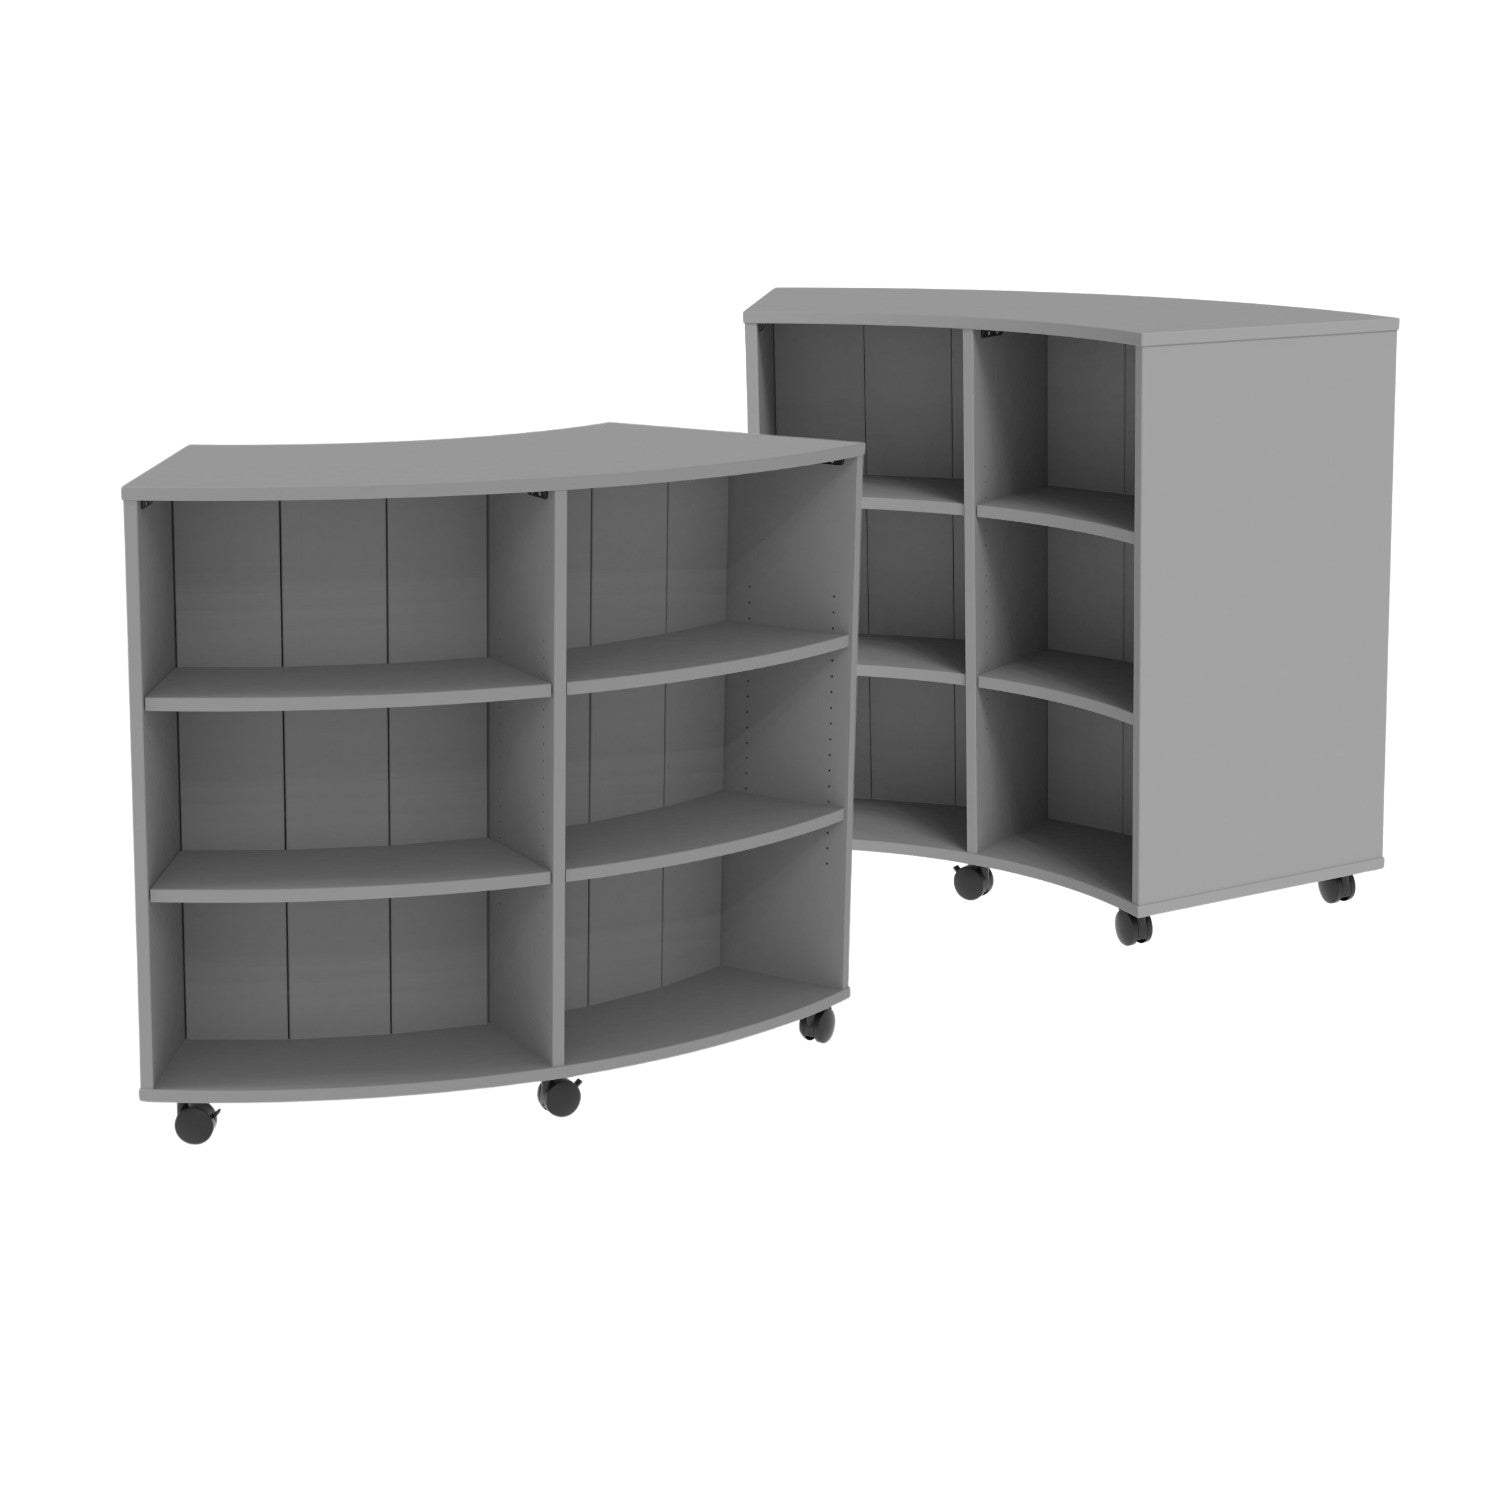 Double-Sided Curved Mobile Bookcase with 12 Shelves, 48" High